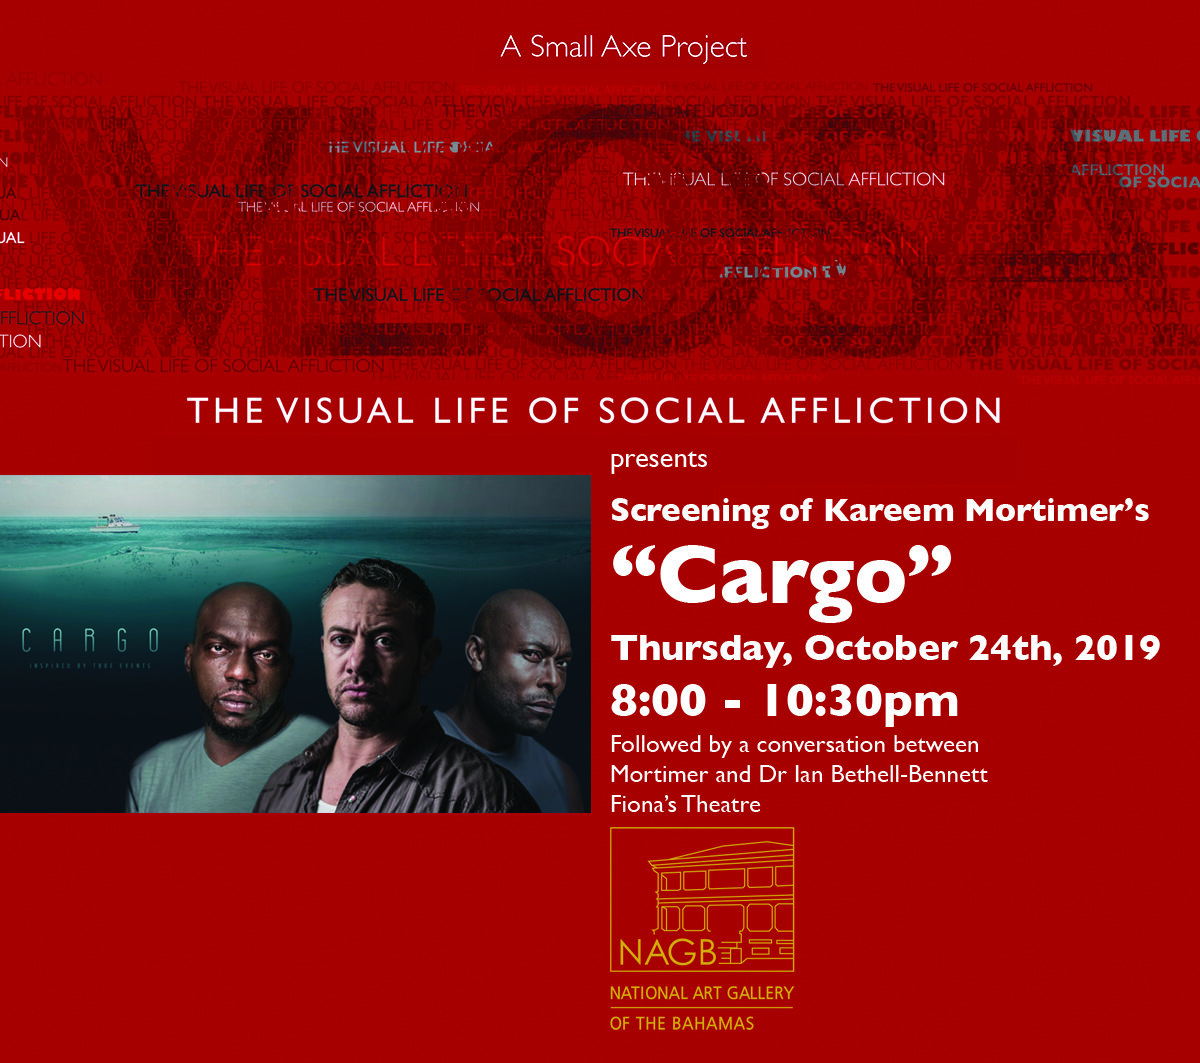 Movie screening as part of the programming for “The Visual Life of Social Affliction”, a Small Axe Project.